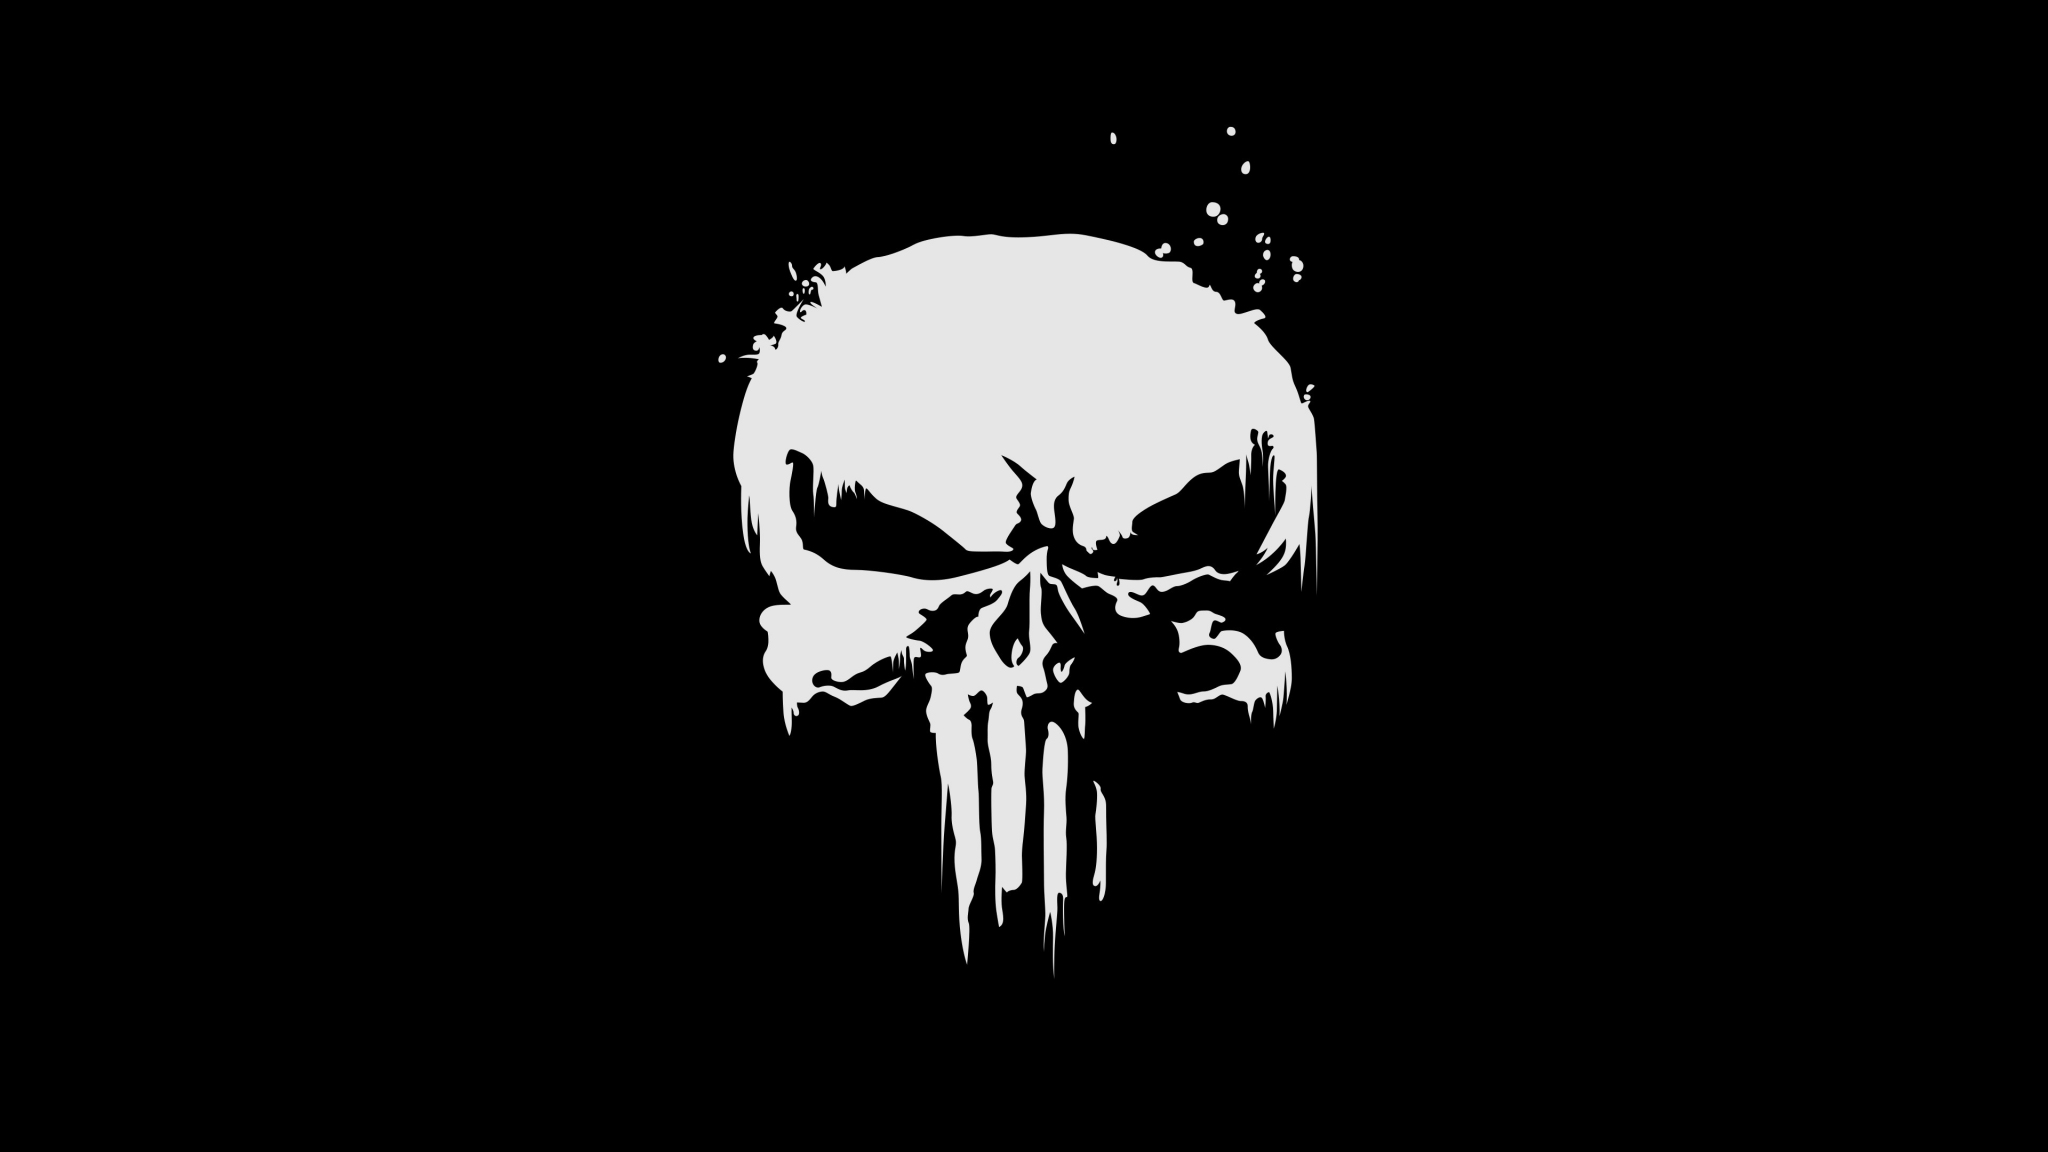 Download 48x1152 Wallpaper The Punisher Logo Skull Dual Wide Widescreen 48x1152 Hd Image Background 1252